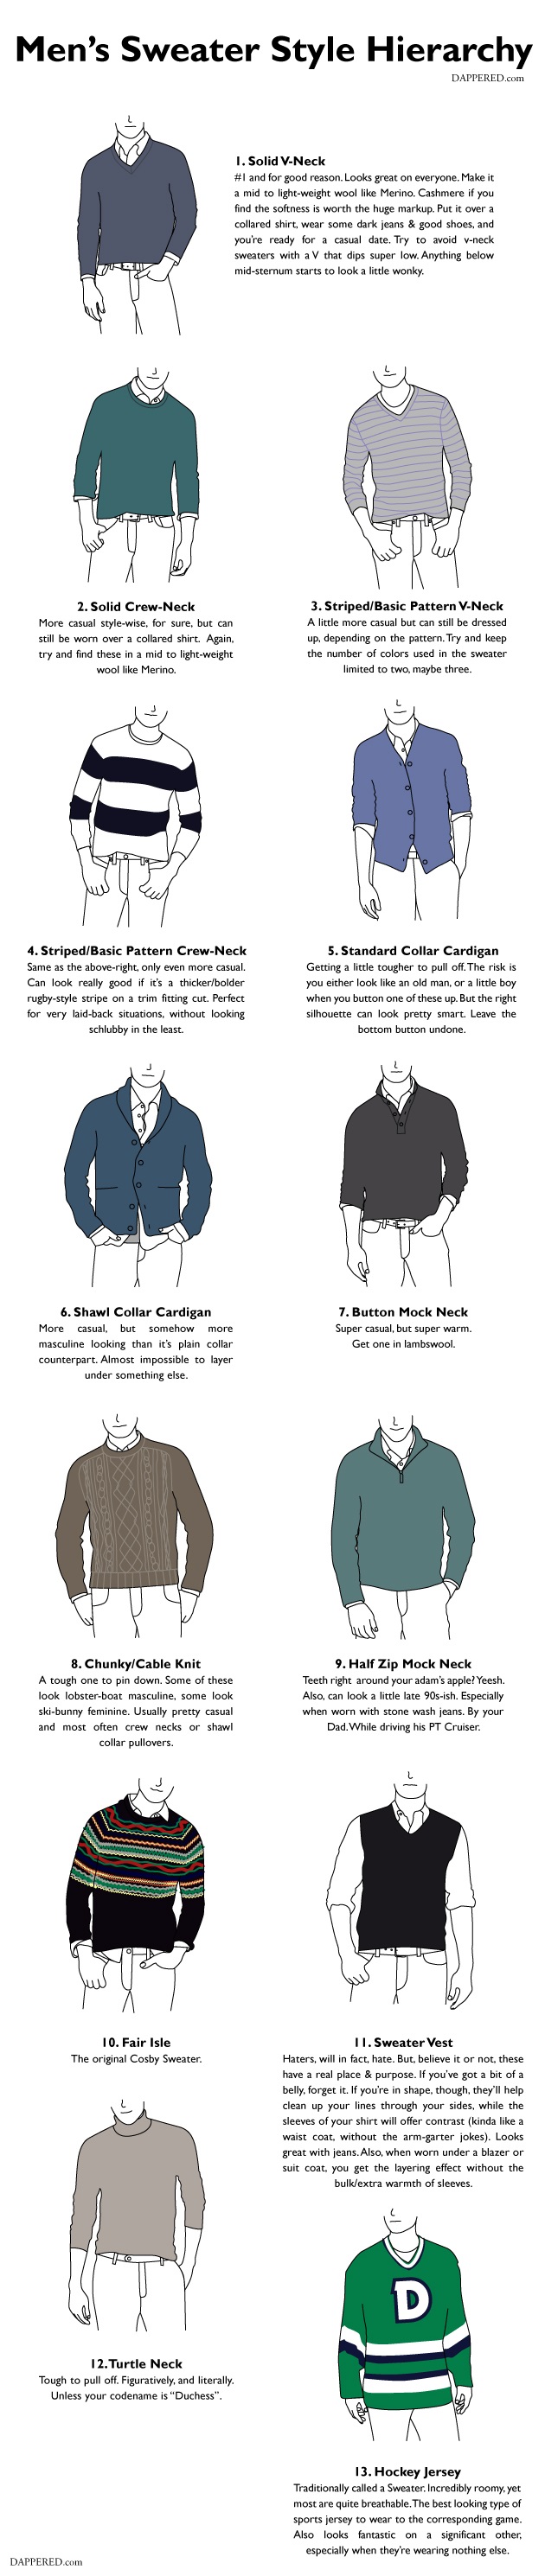 sweaters info graphic by dappered